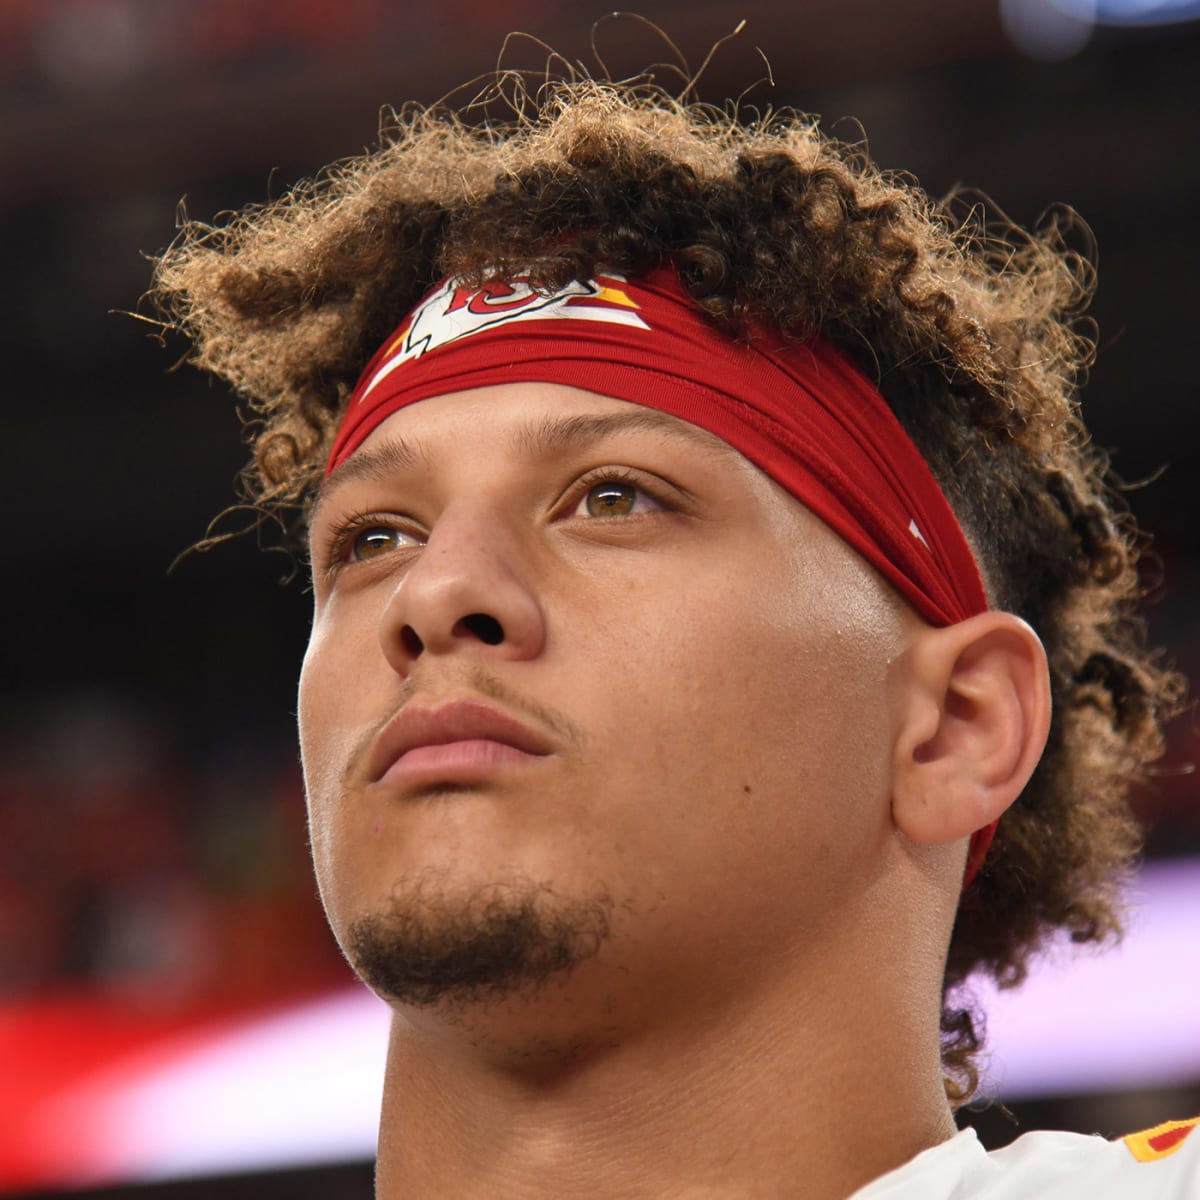 That famous Mahomes hairstyle started as a bet